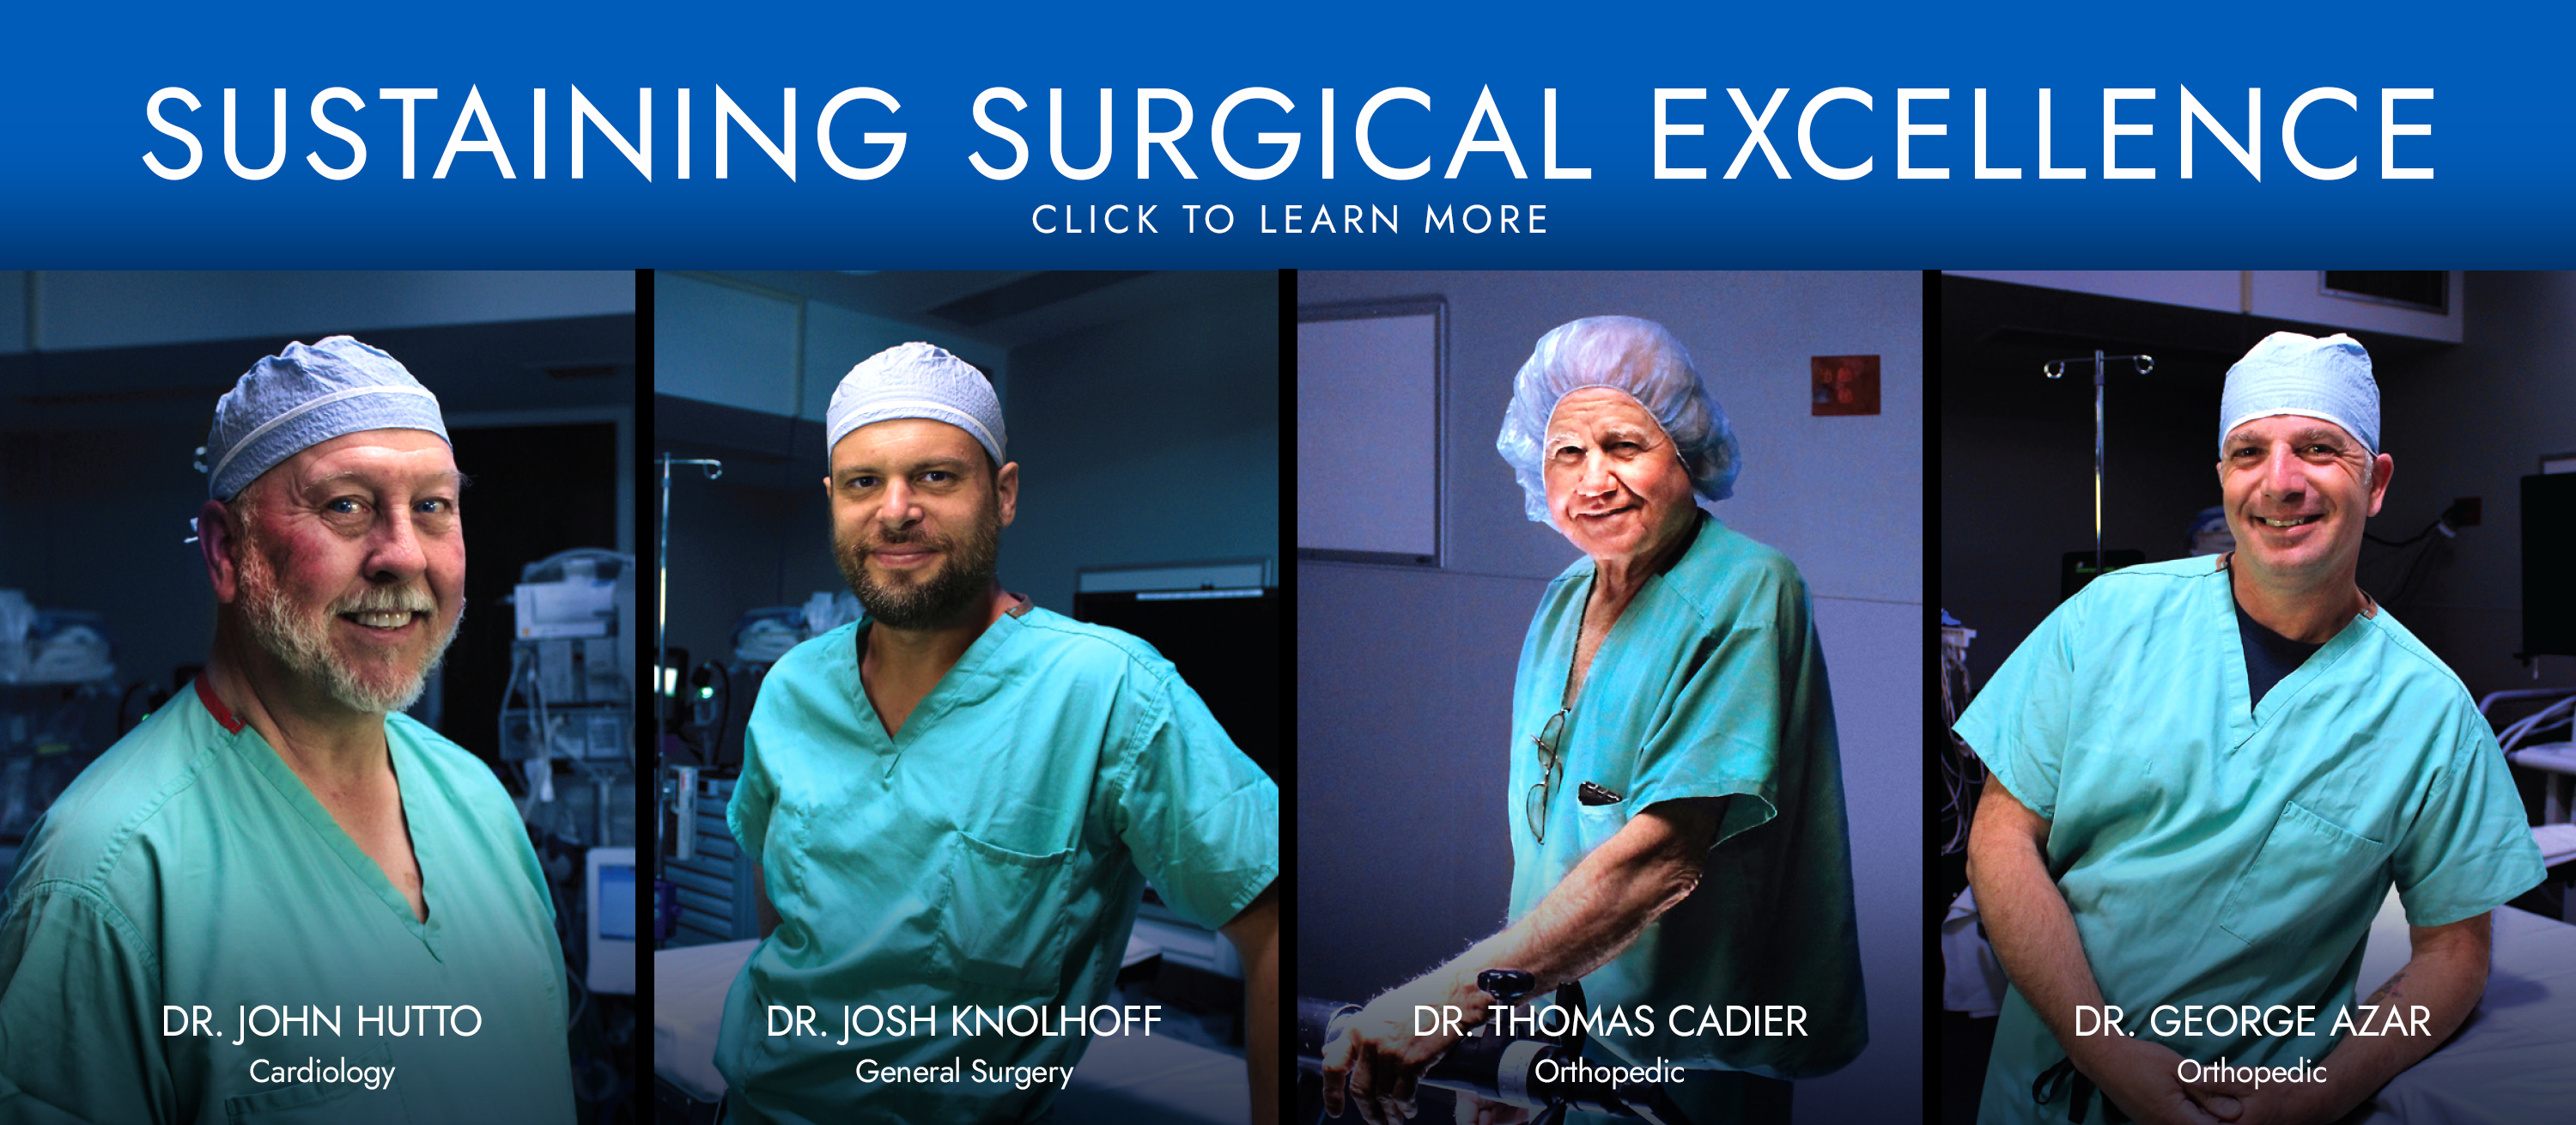 Sustaining Surgical Excellence 
Click to Learn More

Dtr. John Hutto
Cardiology 

Dr. Josh Knolhoff
General Surgery

Dr. Thomas Caider 
Orthopedic

Dr. George Azar
Orthopedic